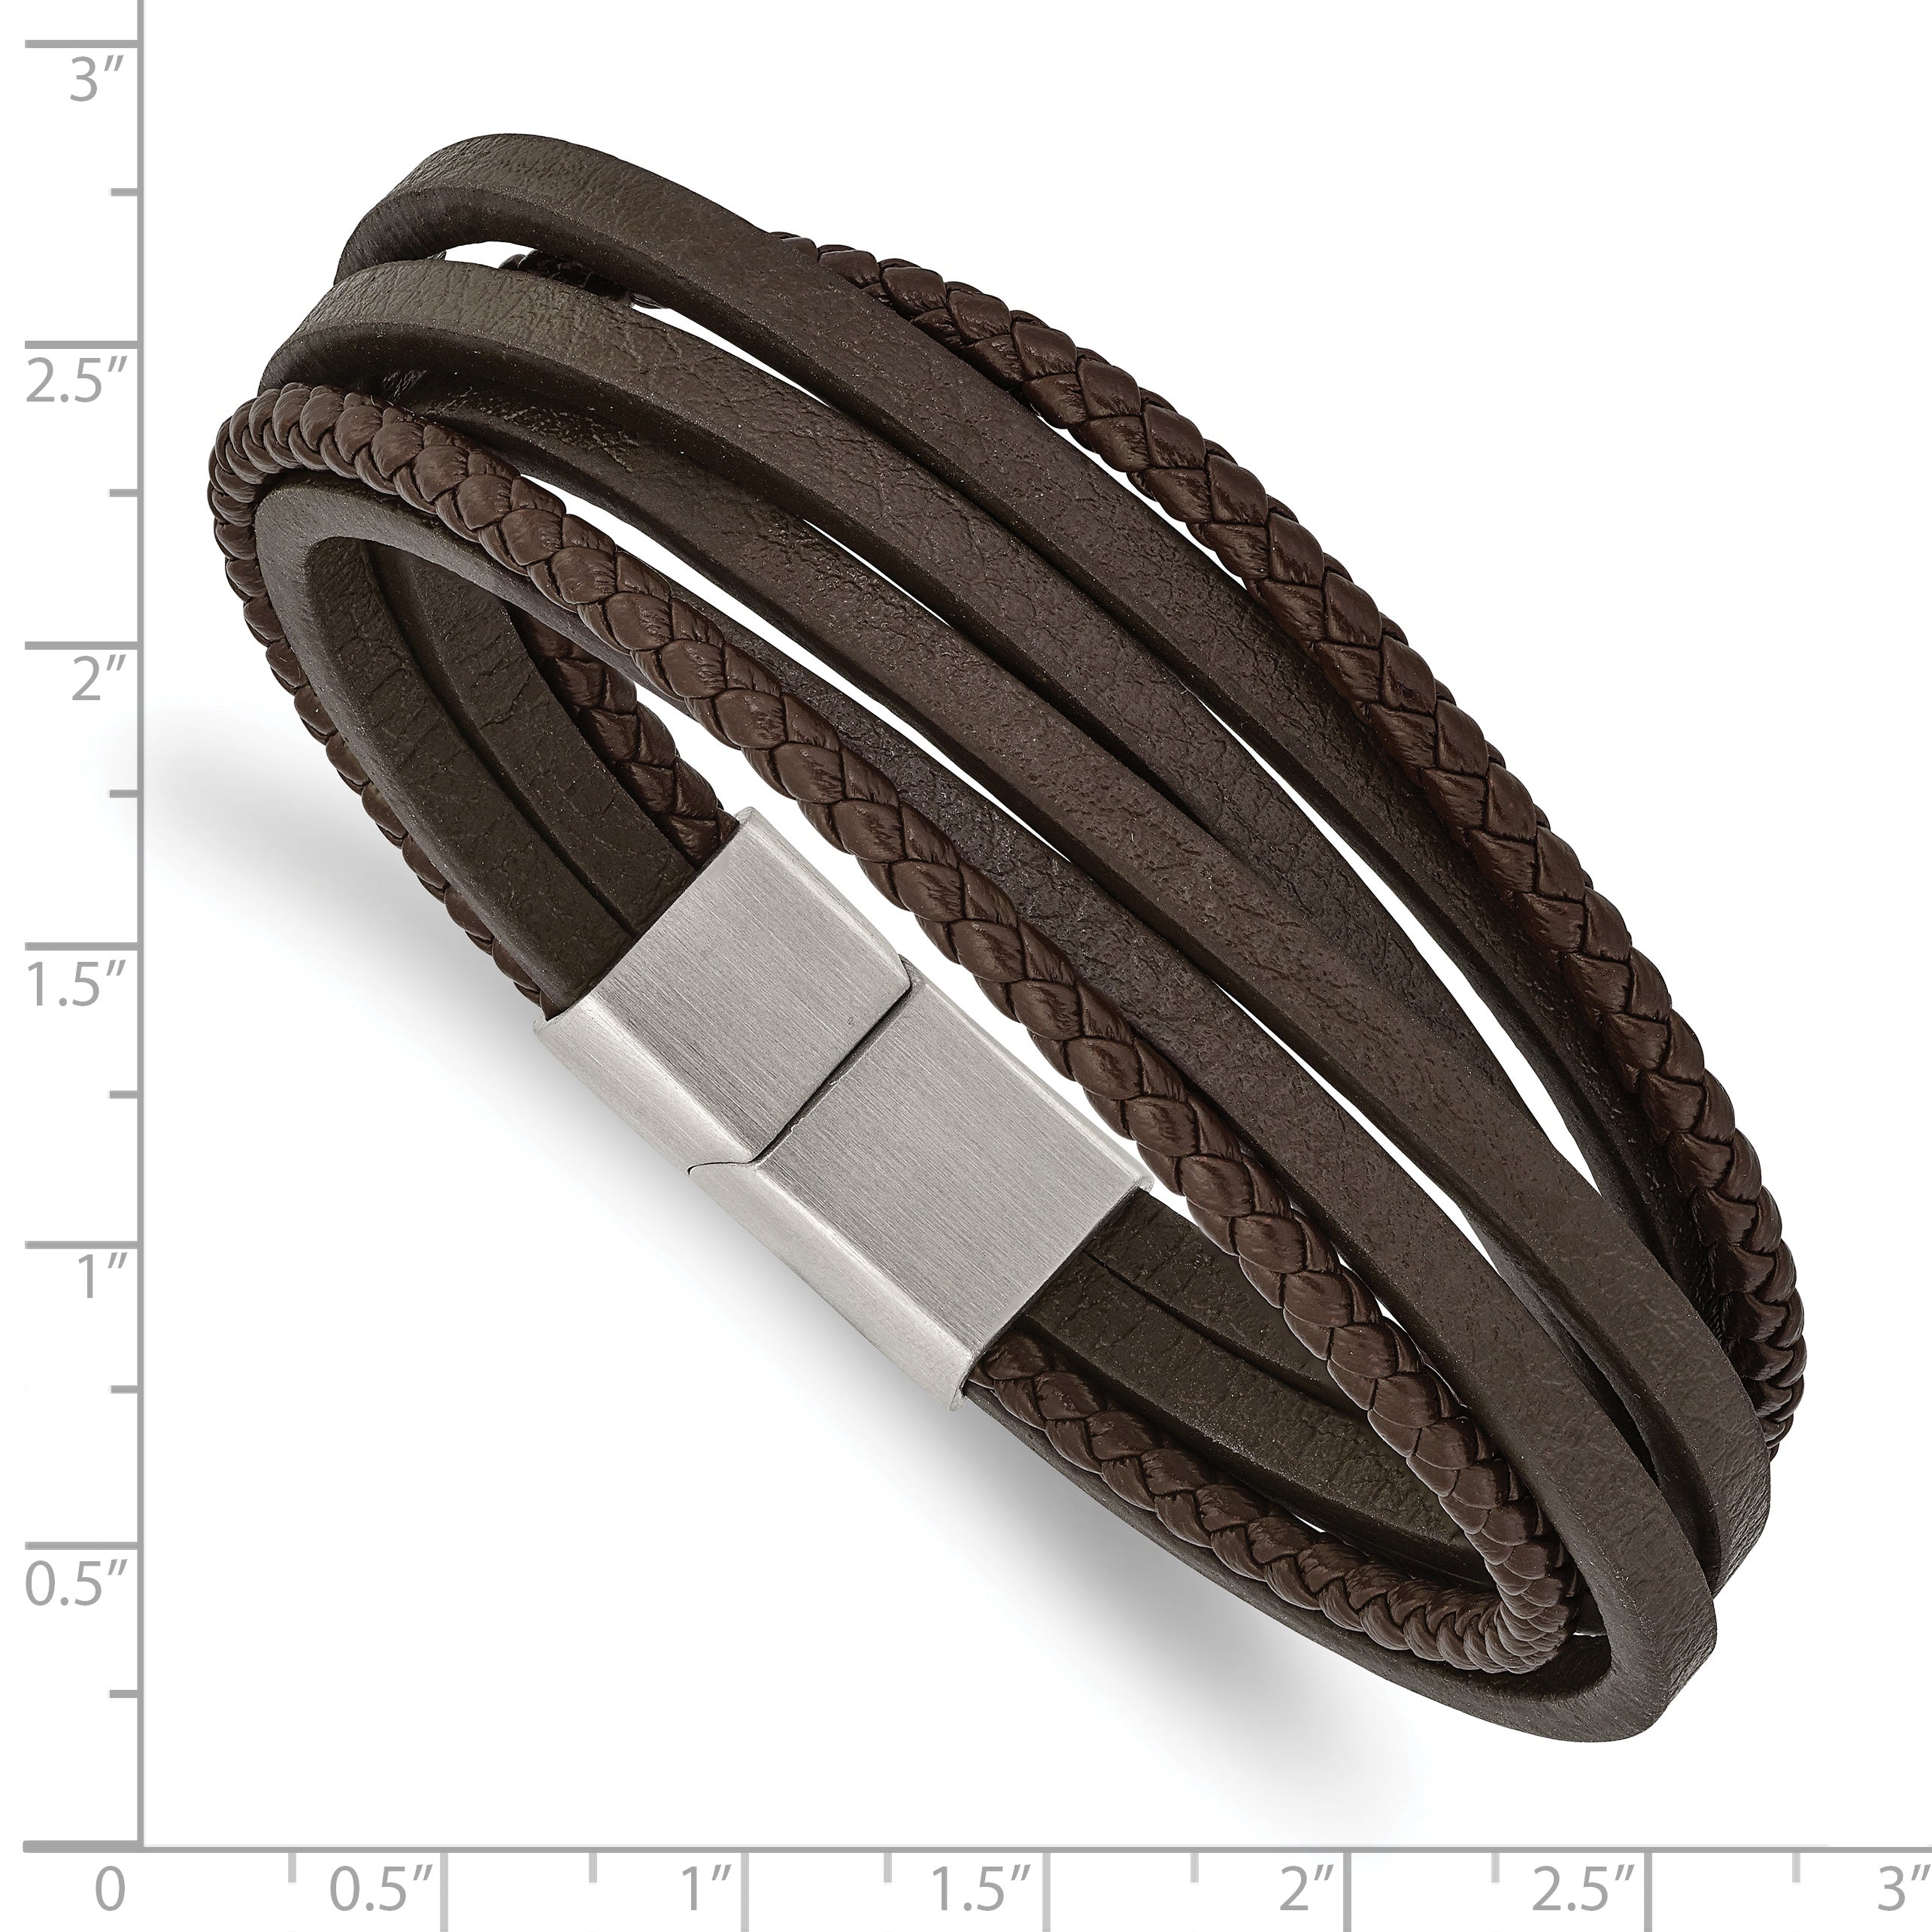 Chisel Stainless Steel Brushed Multi Strand Brown Leather 8 inch Bracelet